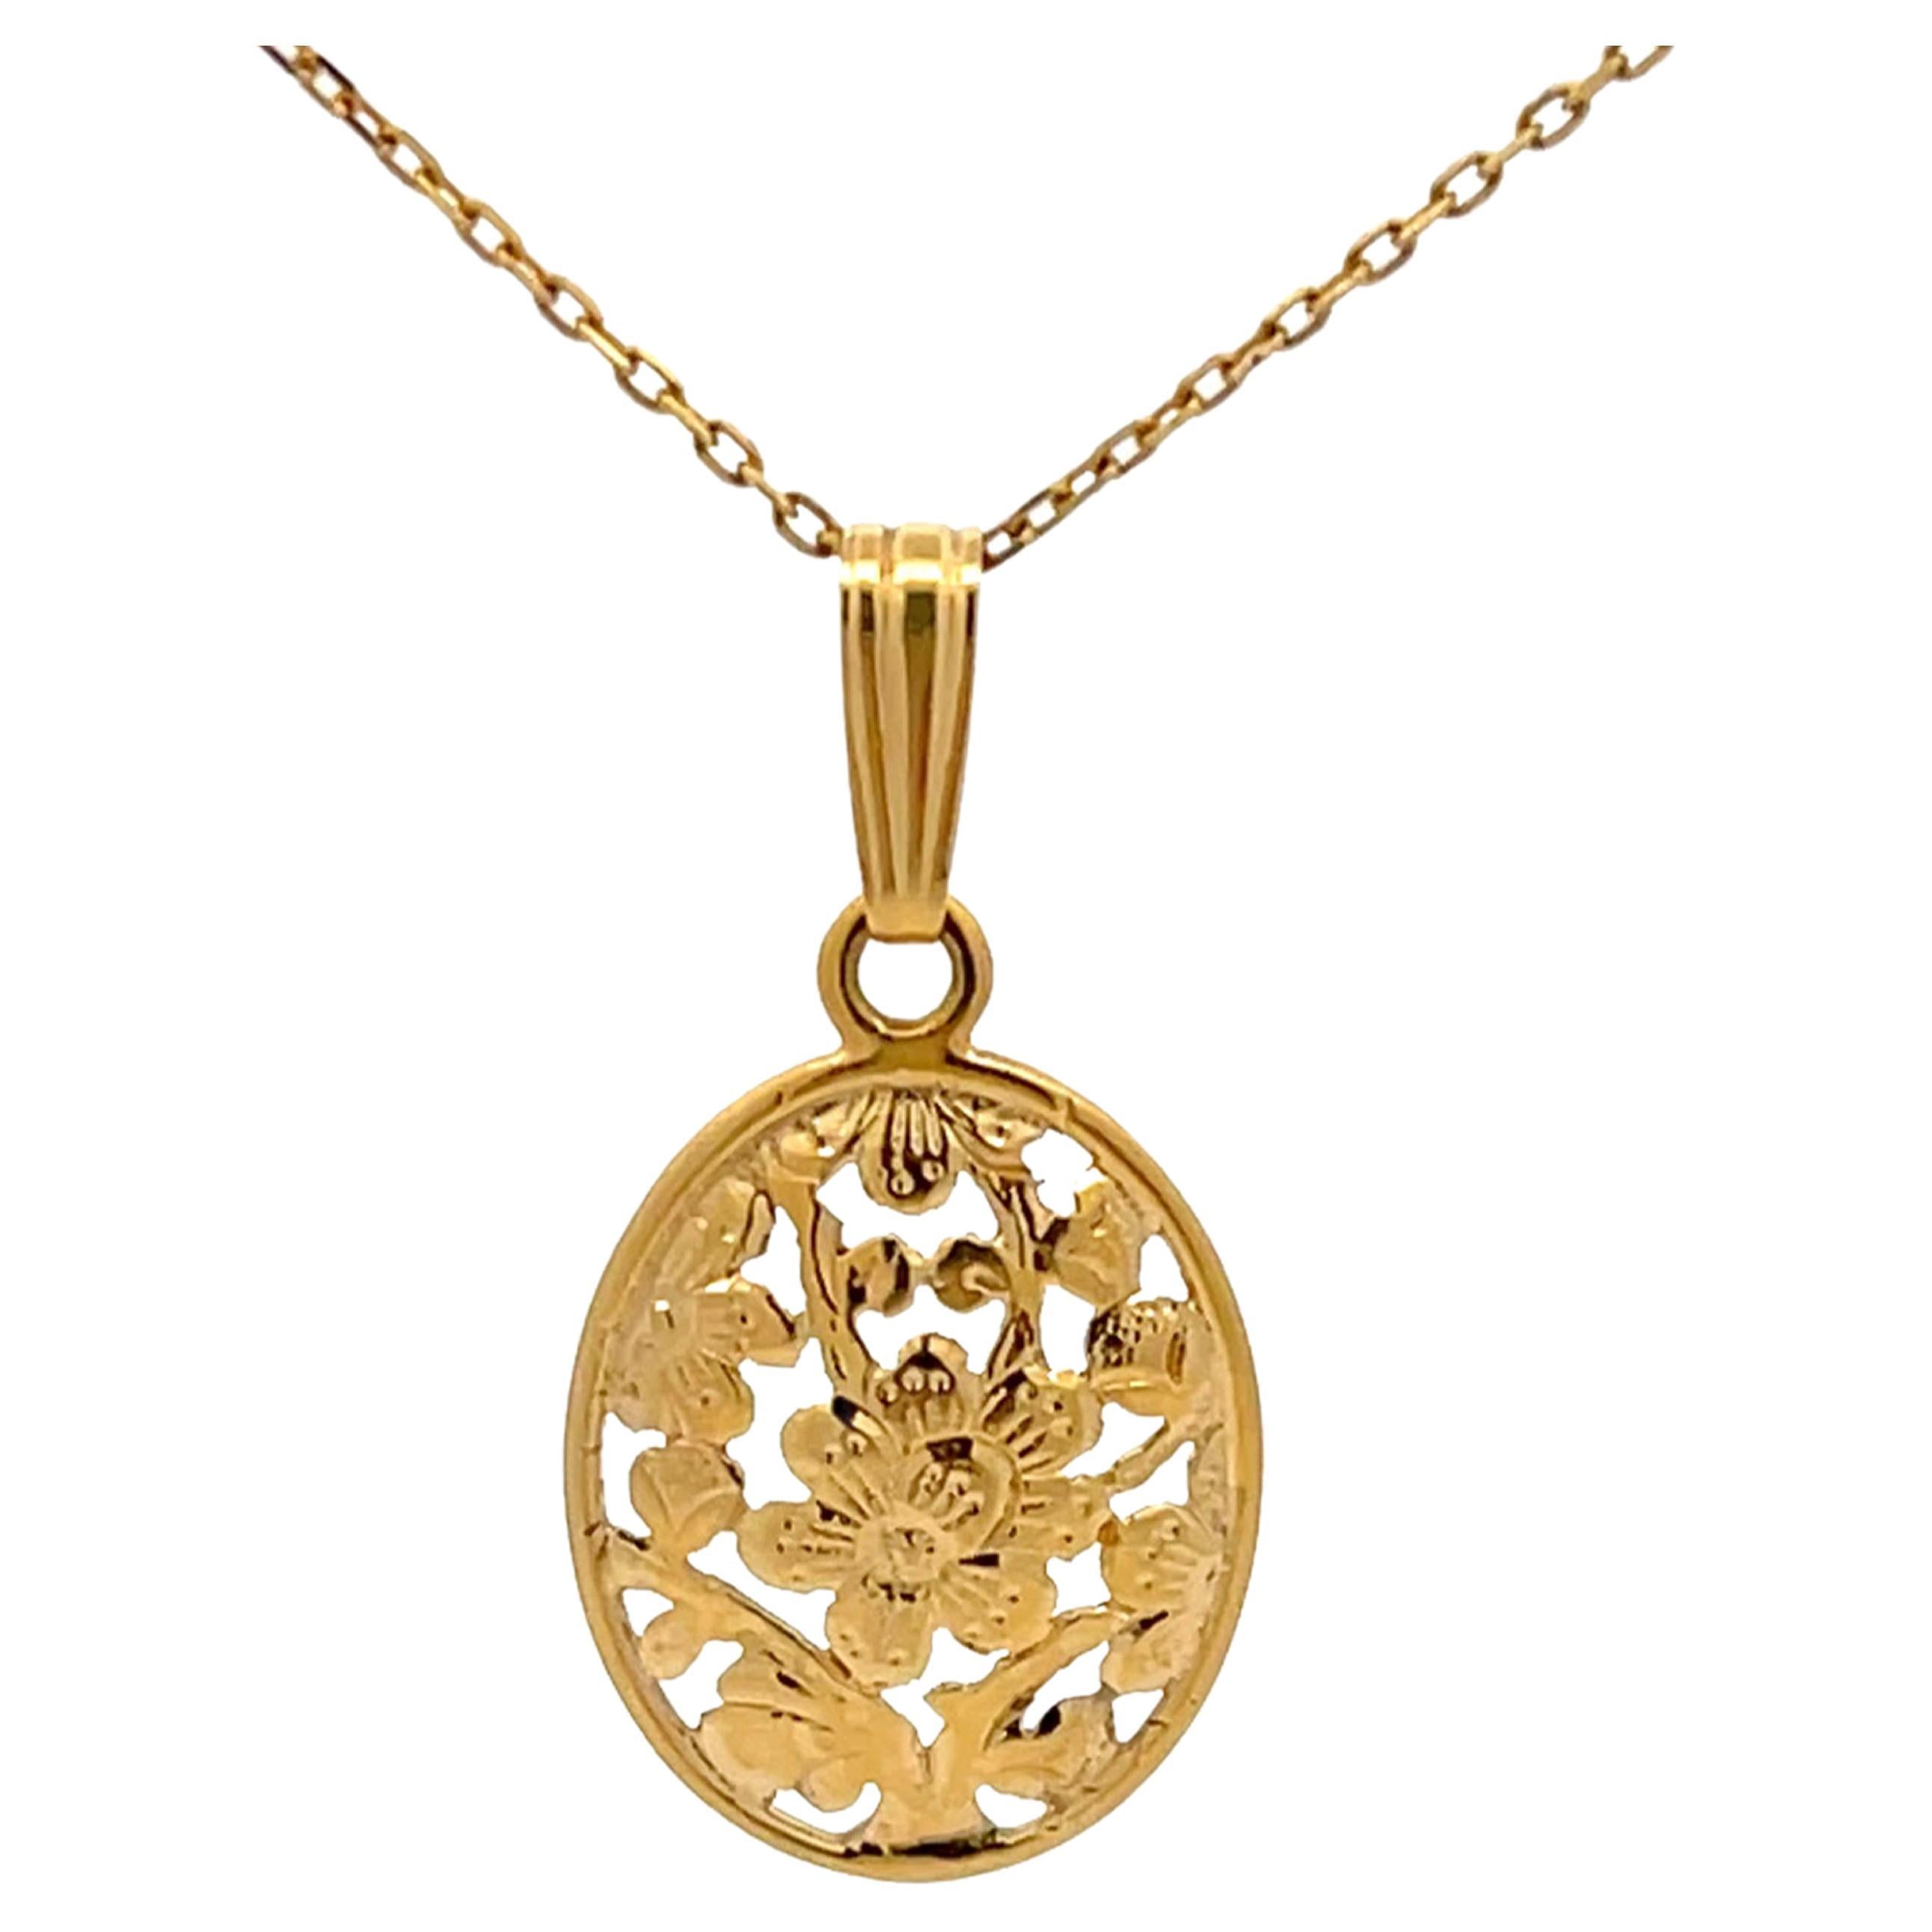 Mings Hawaii Plum Blossom Pierced Oval Pendant in 14k Yellow Gold with Chain